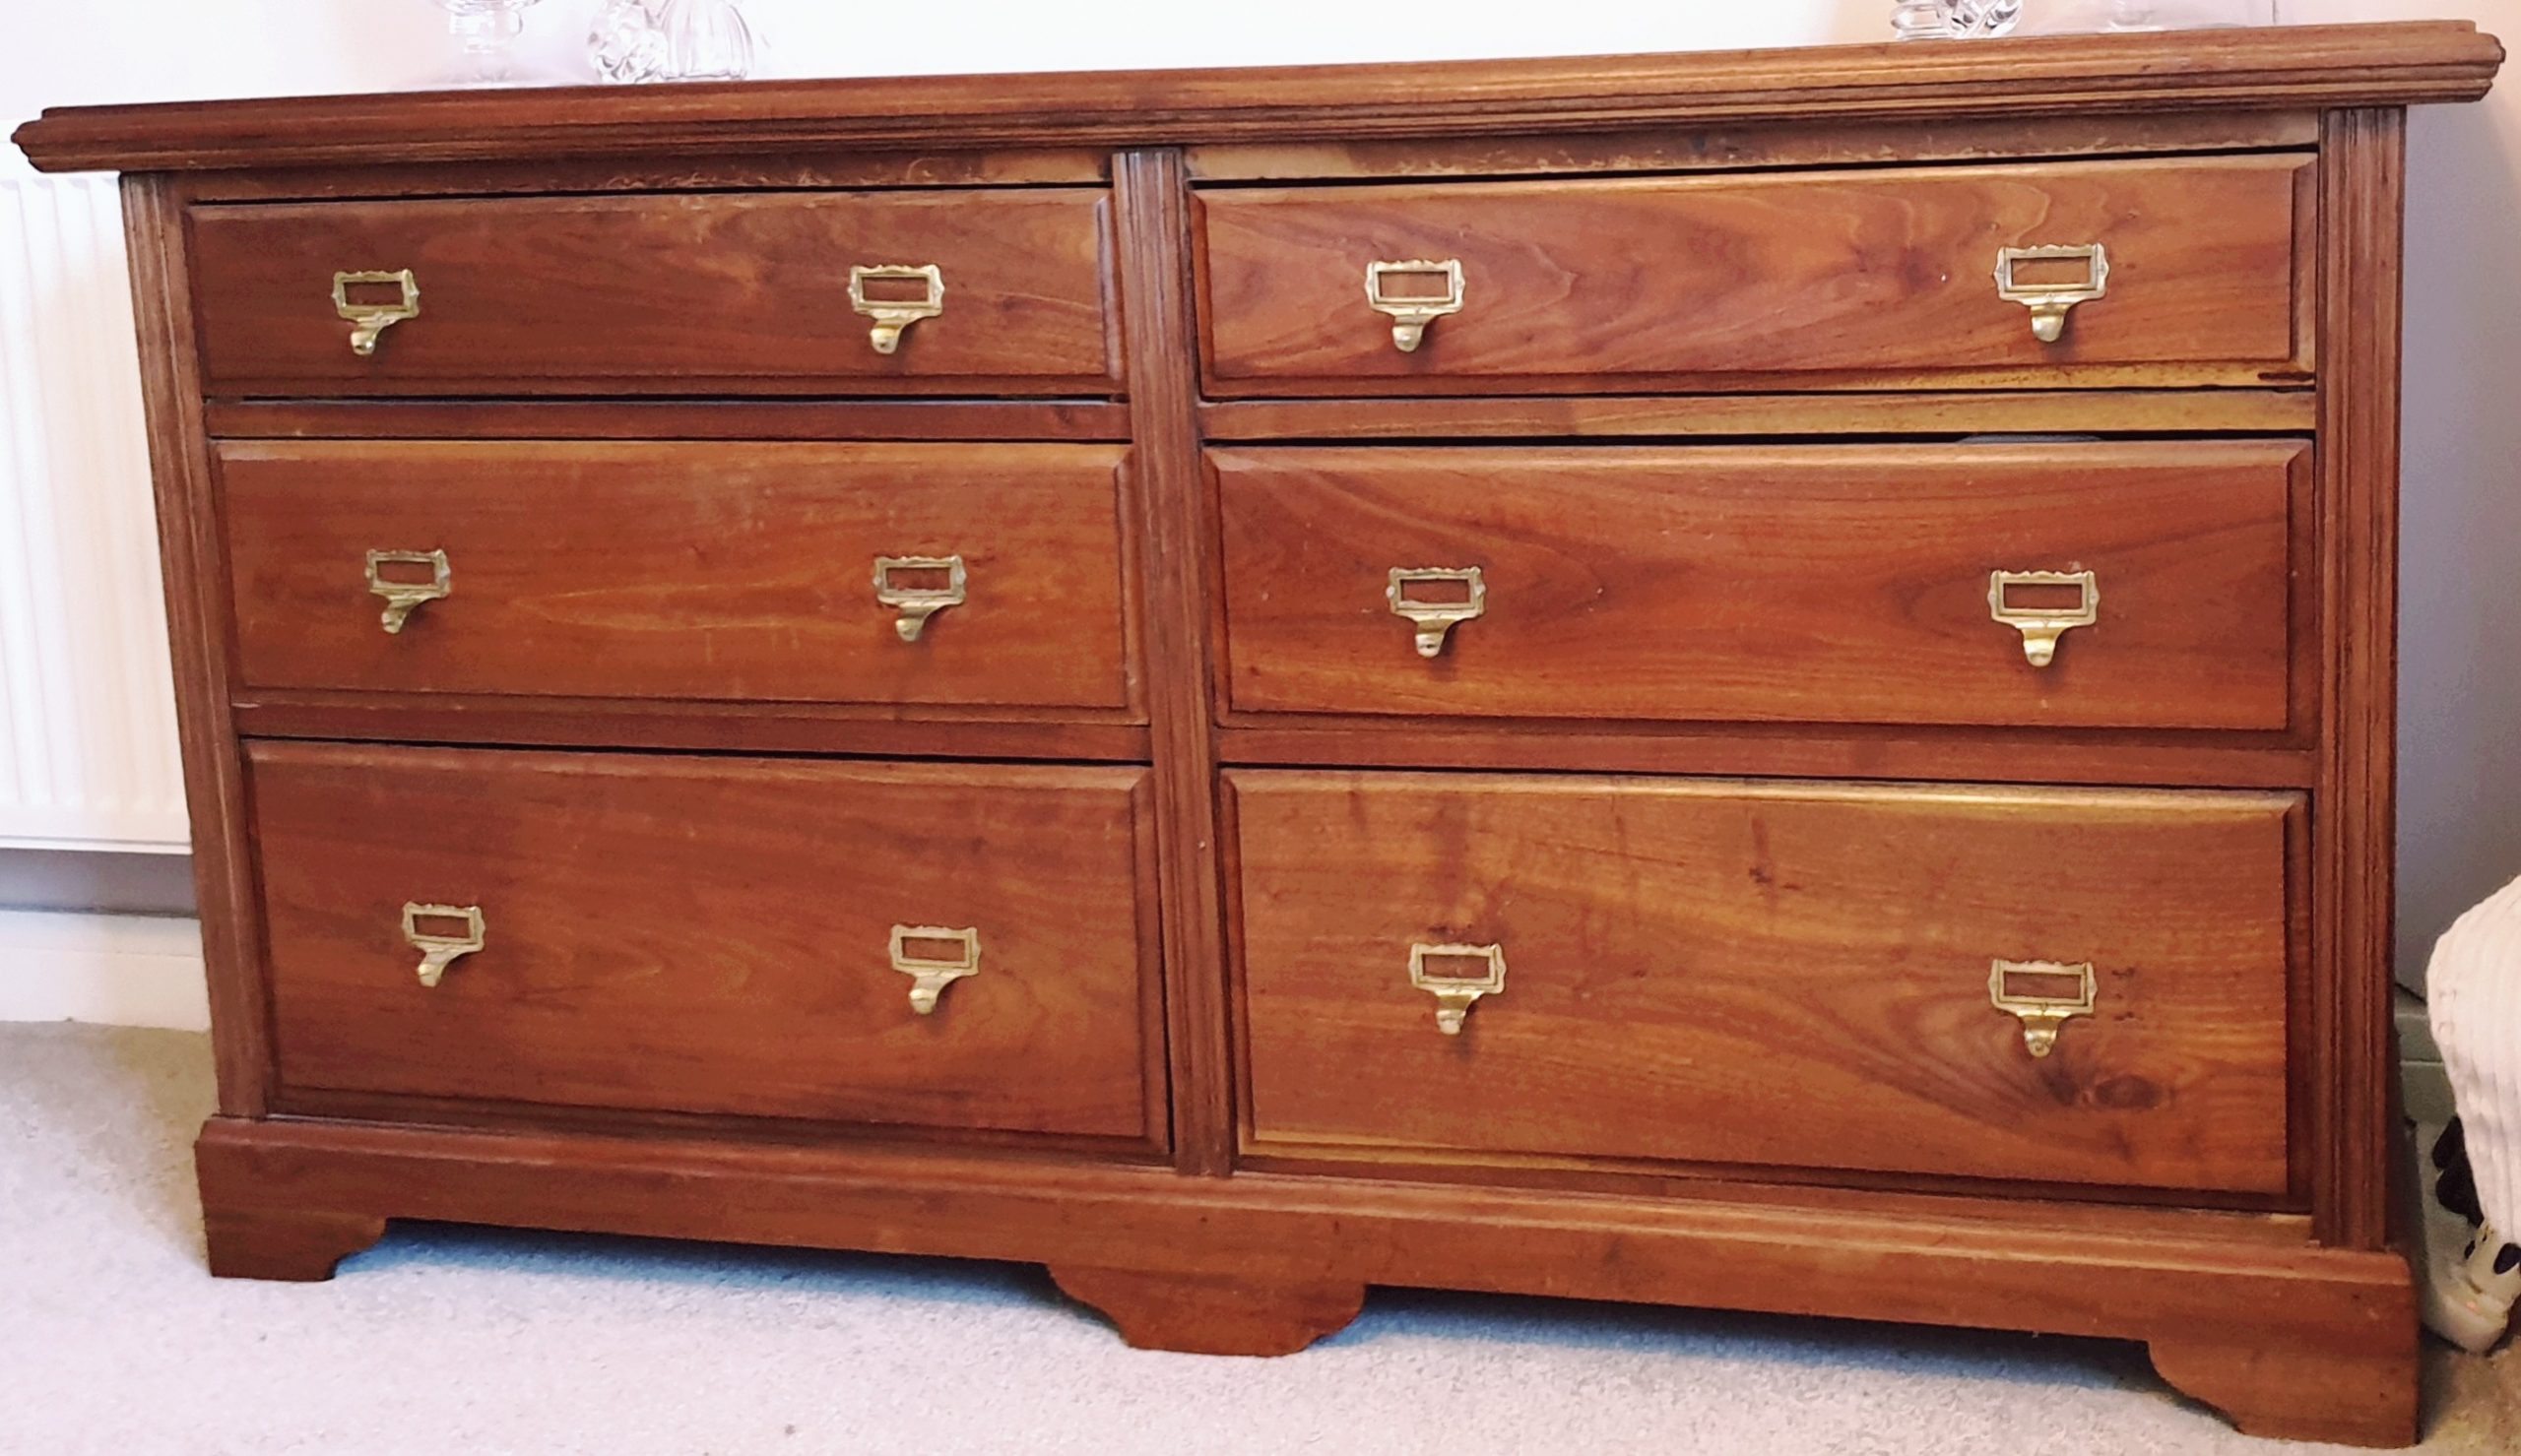 Chest of drawers created by heavily modifying an ornate antique mahogany dresser.